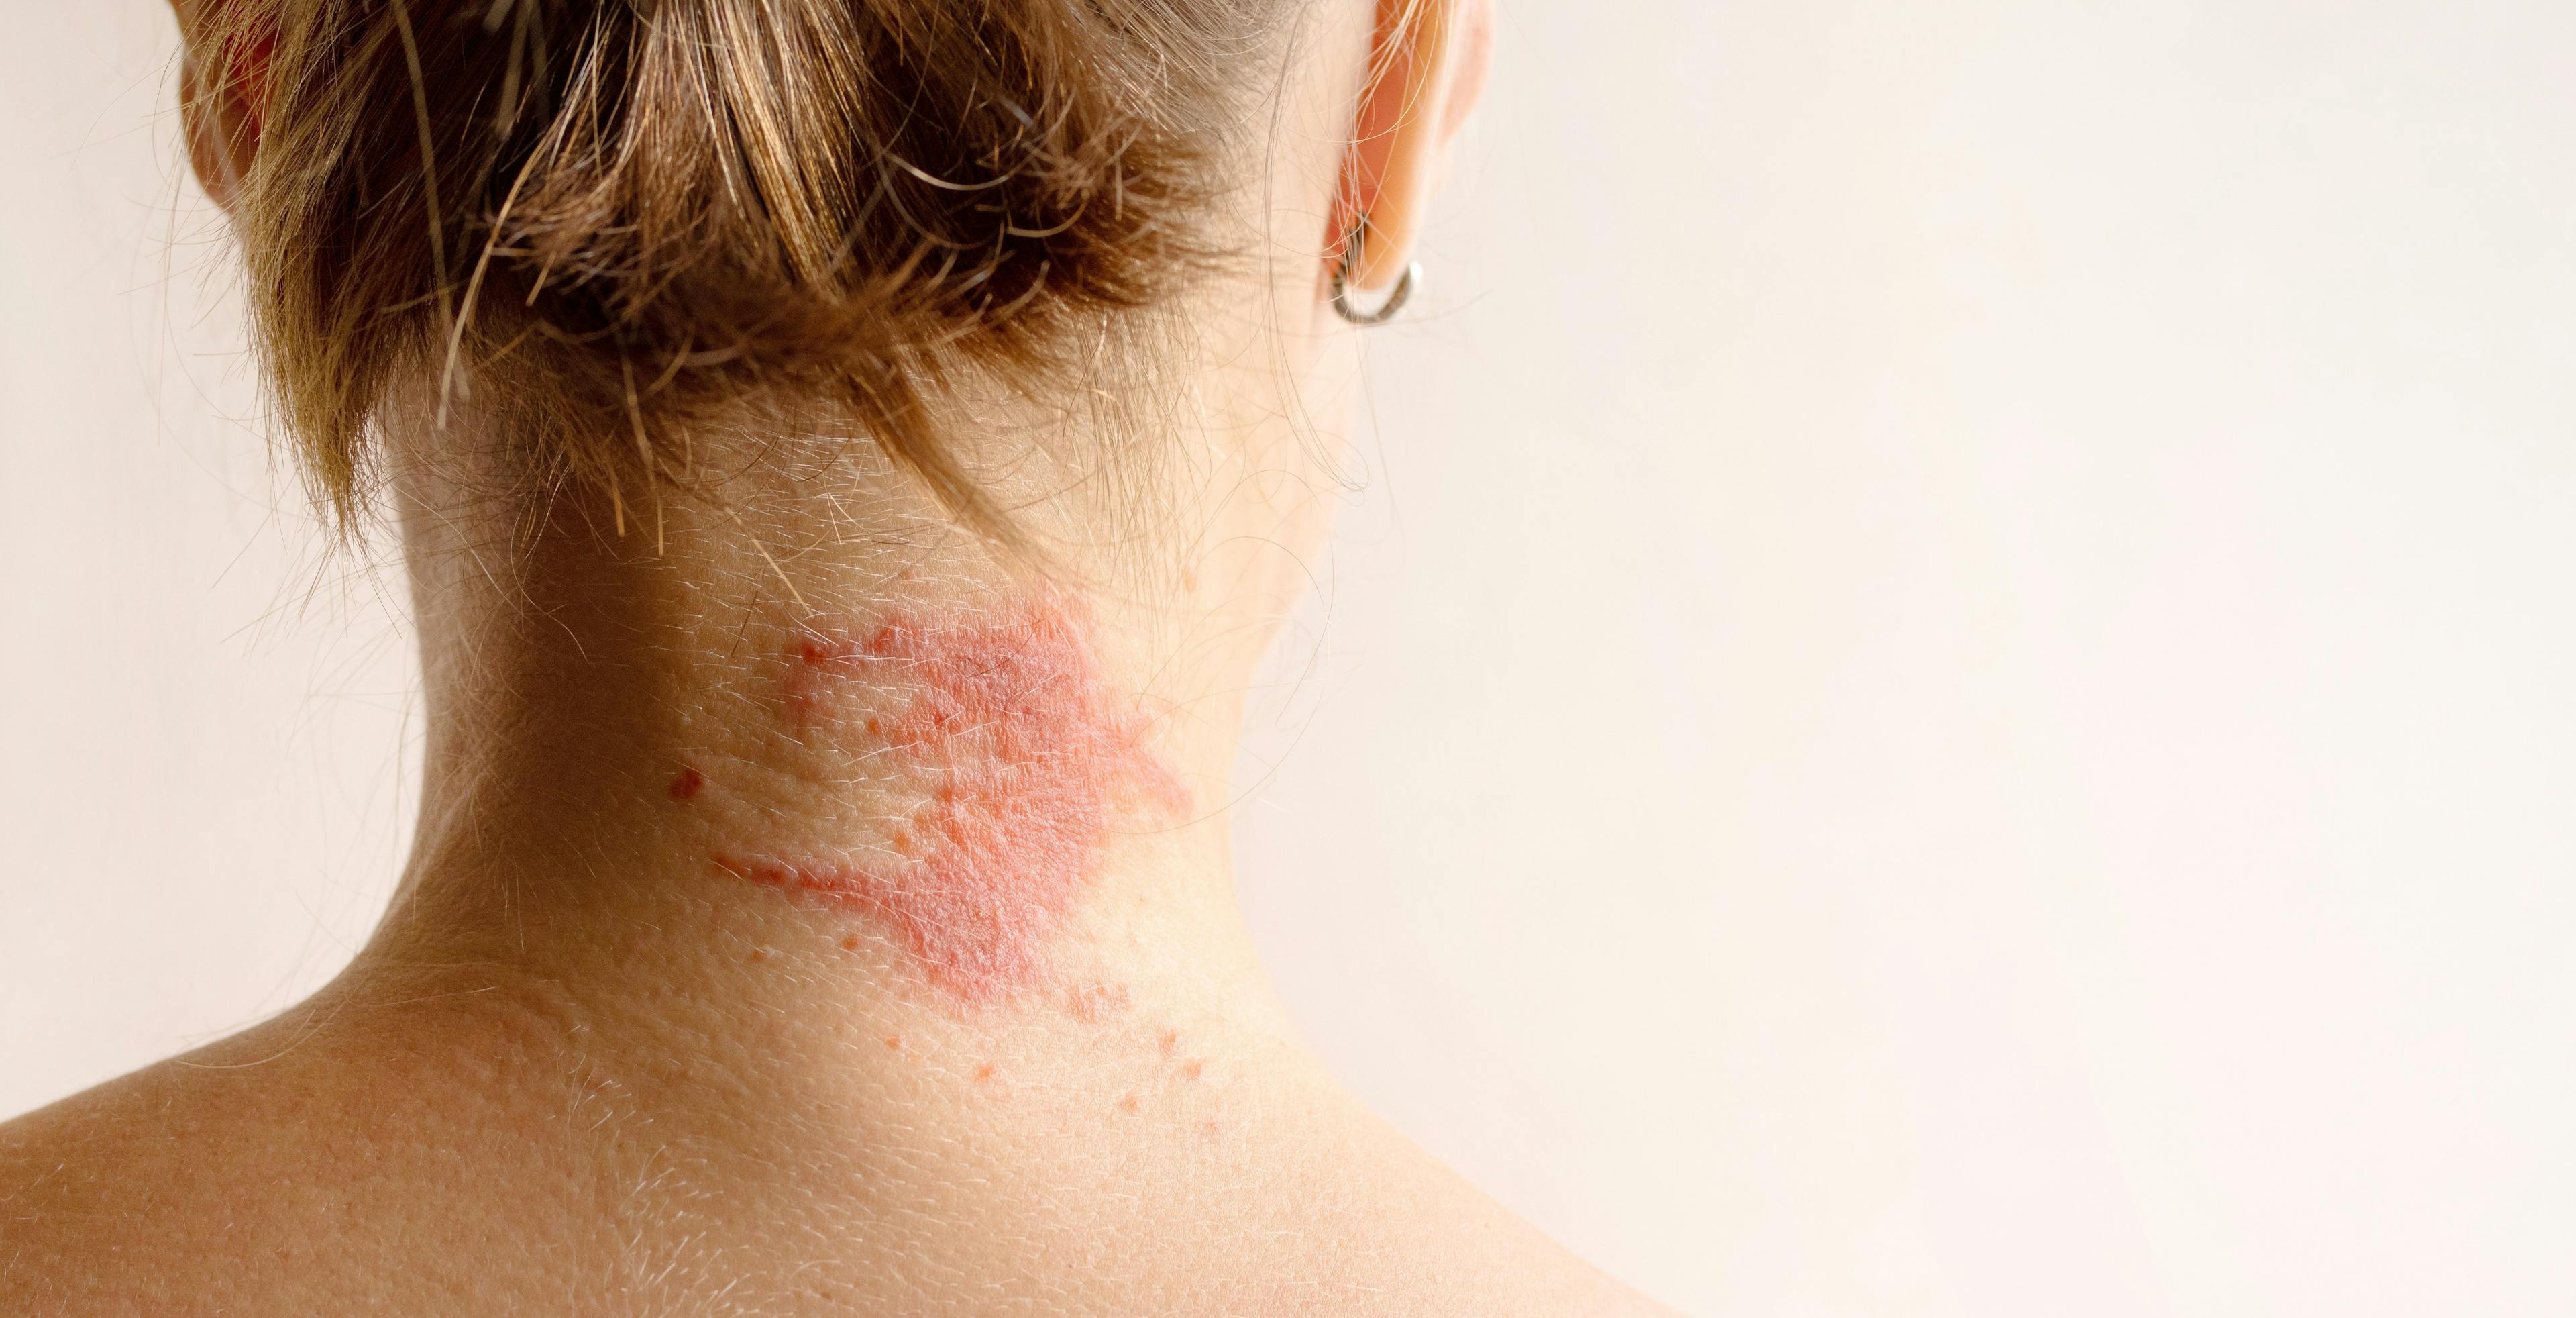 Female patient with atopic dermatitis (AD) on the back of her neck | Image Credit: isavira - stock.adobe.comFemale patient with atopic dermatitis (AD) on the back of her neck | Image Credit: isavira - stock.adobe.comFemale patient with atopic dermatitis (AD) on the back of her neck | Image Credit: isavira - stock.adobe.comFemale patient with atopic dermatitis (AD) on the back of her neck | Image Credit: isavira - stock.adobe.comFemale patient with atopic dermatitis (AD) on the back of her neck | Image Credit: isavira - stock.adobe.comFemale patient with atopic dermatitis (AD) on the back of her neck | Image Credit: isavira - stock.adobe.comFemale patient with atopic dermatitis (AD) on the back of her neck | Image Credit: isavira - stock.adobe.com